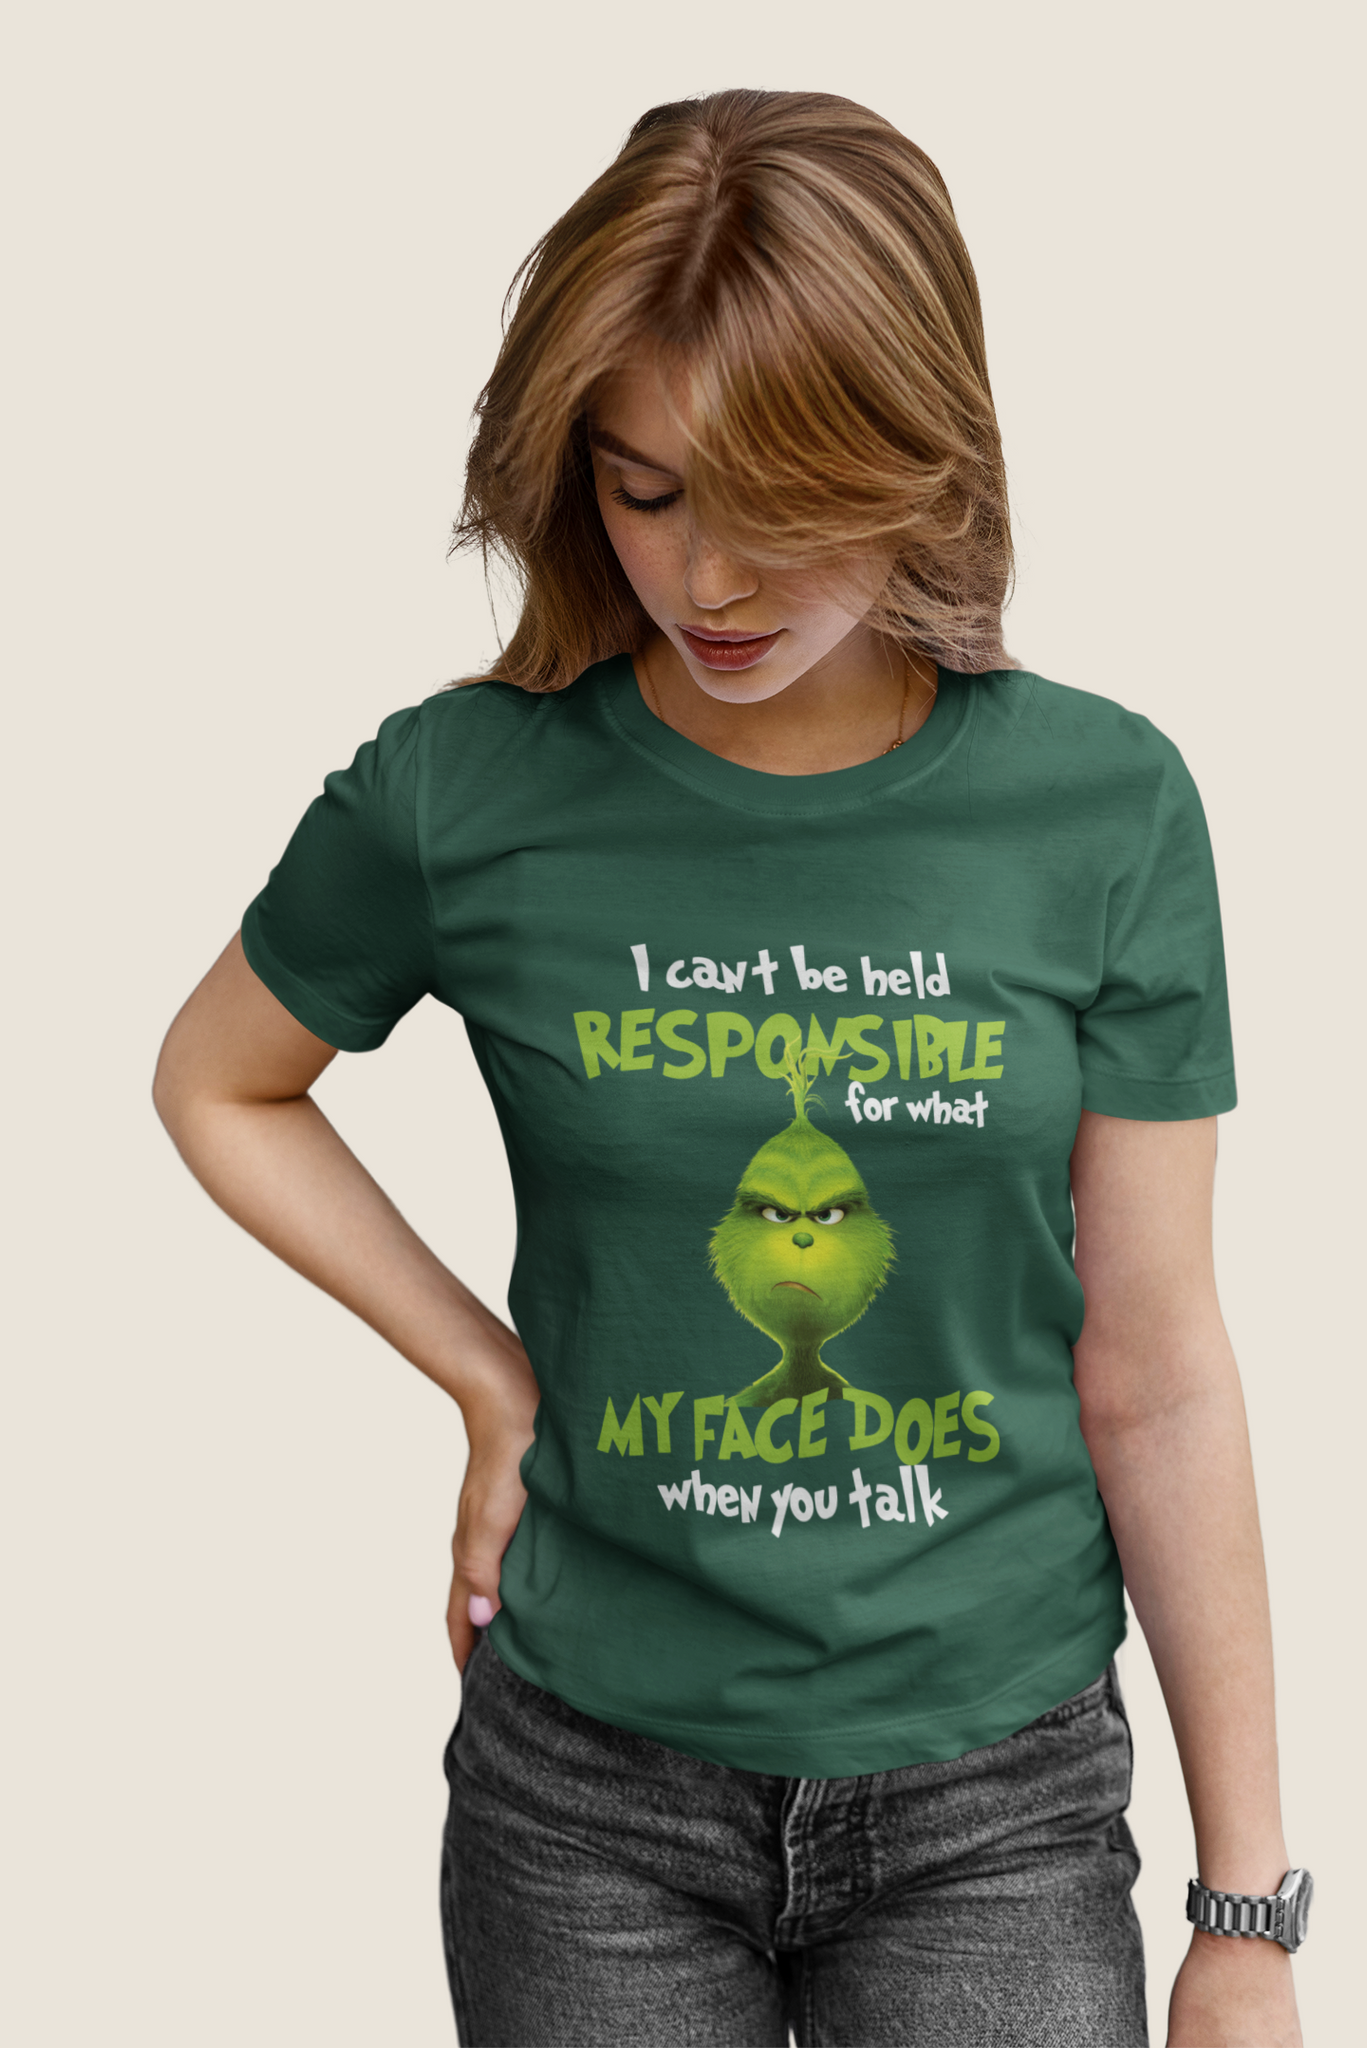 Grinch T Shirt, I Cant Be Held Responsible For What My Face Does Tshirt, Christmas Movie Shirt, Christmas Gifts